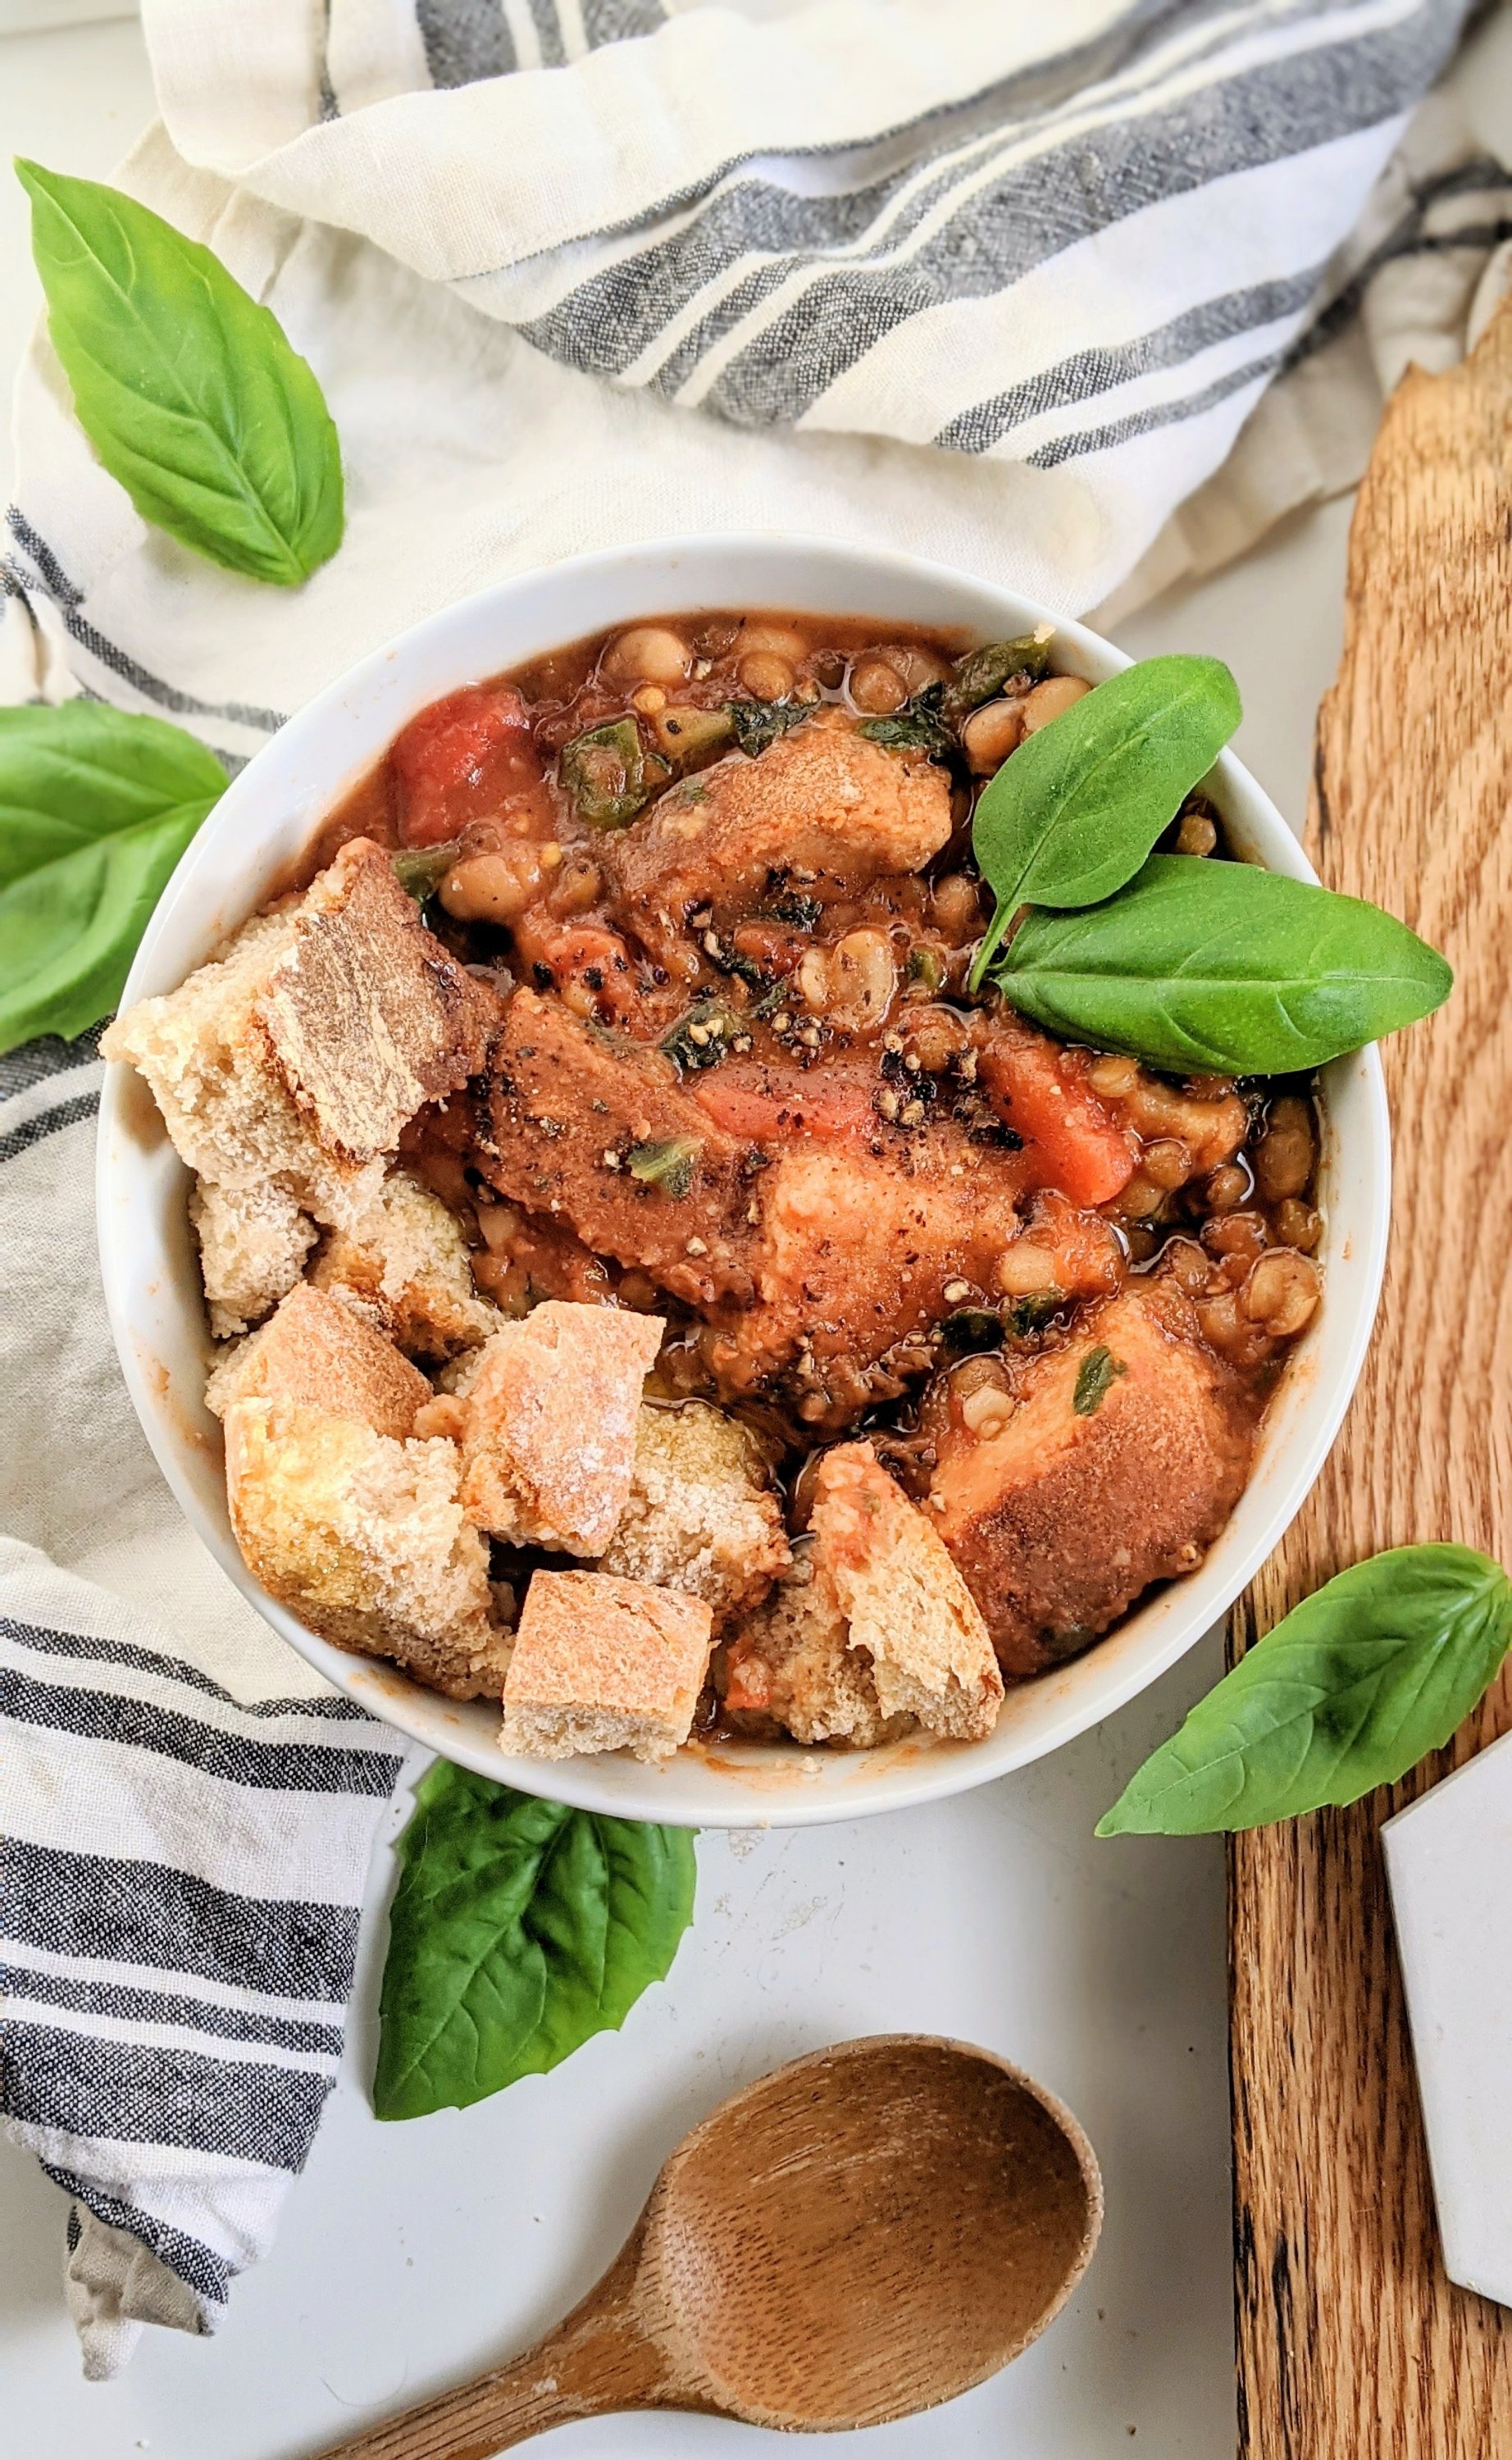 vegan ribollita soup with lentils high protein italian soups vegetarian meatless gluten free bread ribollita recipes veganuary healthy bread soup tuscan italian appetizers meals